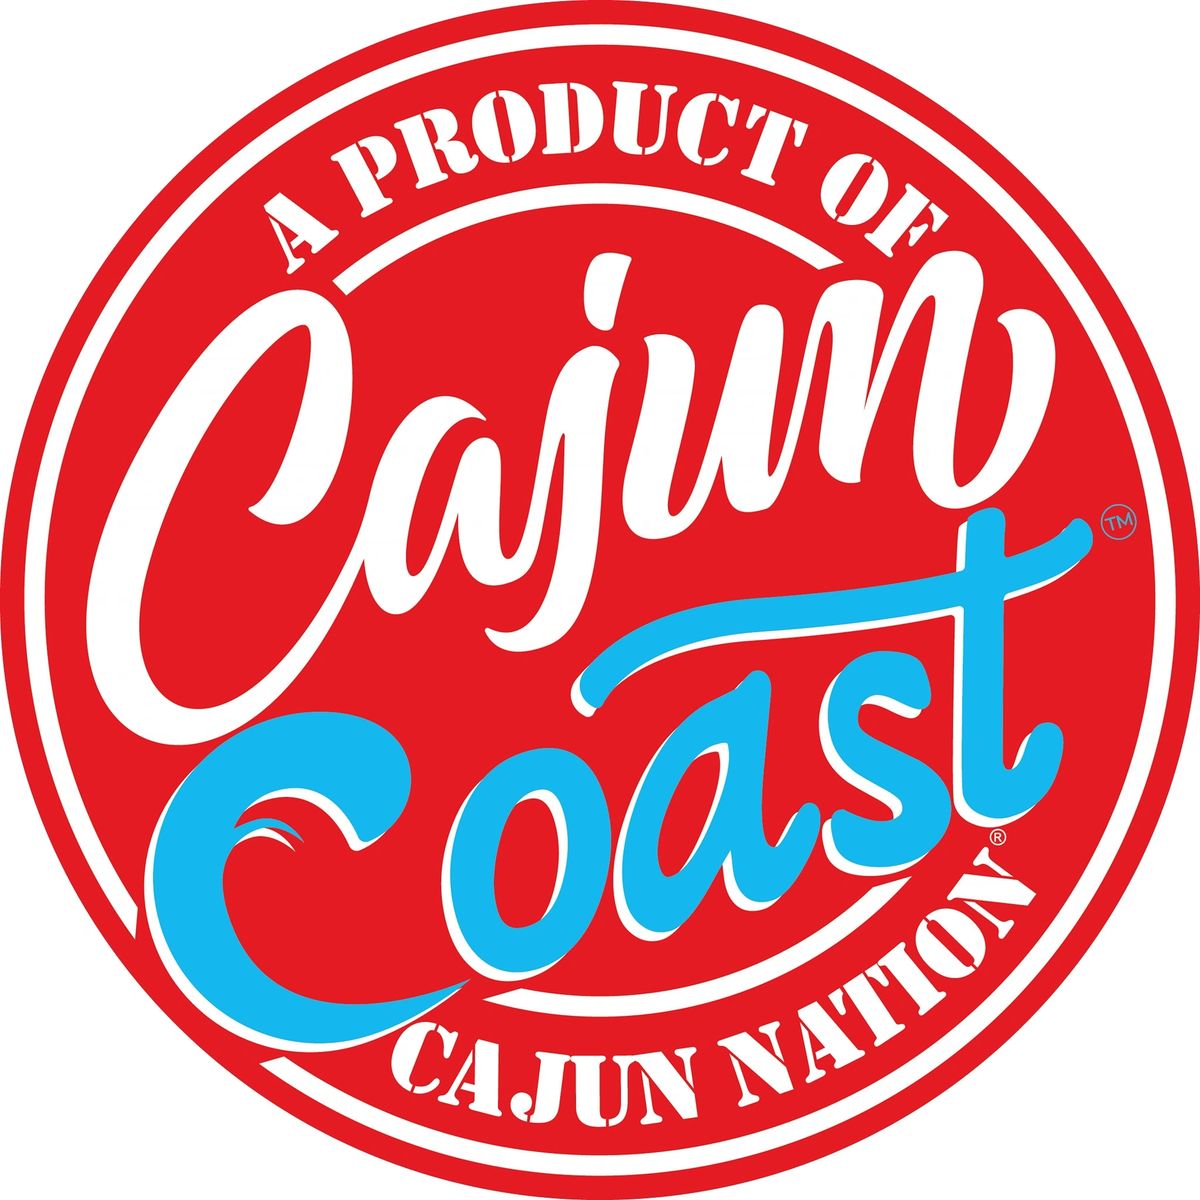  Cajun Coast Stickers are 3 inch custom die cut stickers. Thick, durable vinyl protects from scratches, water & sunlight.